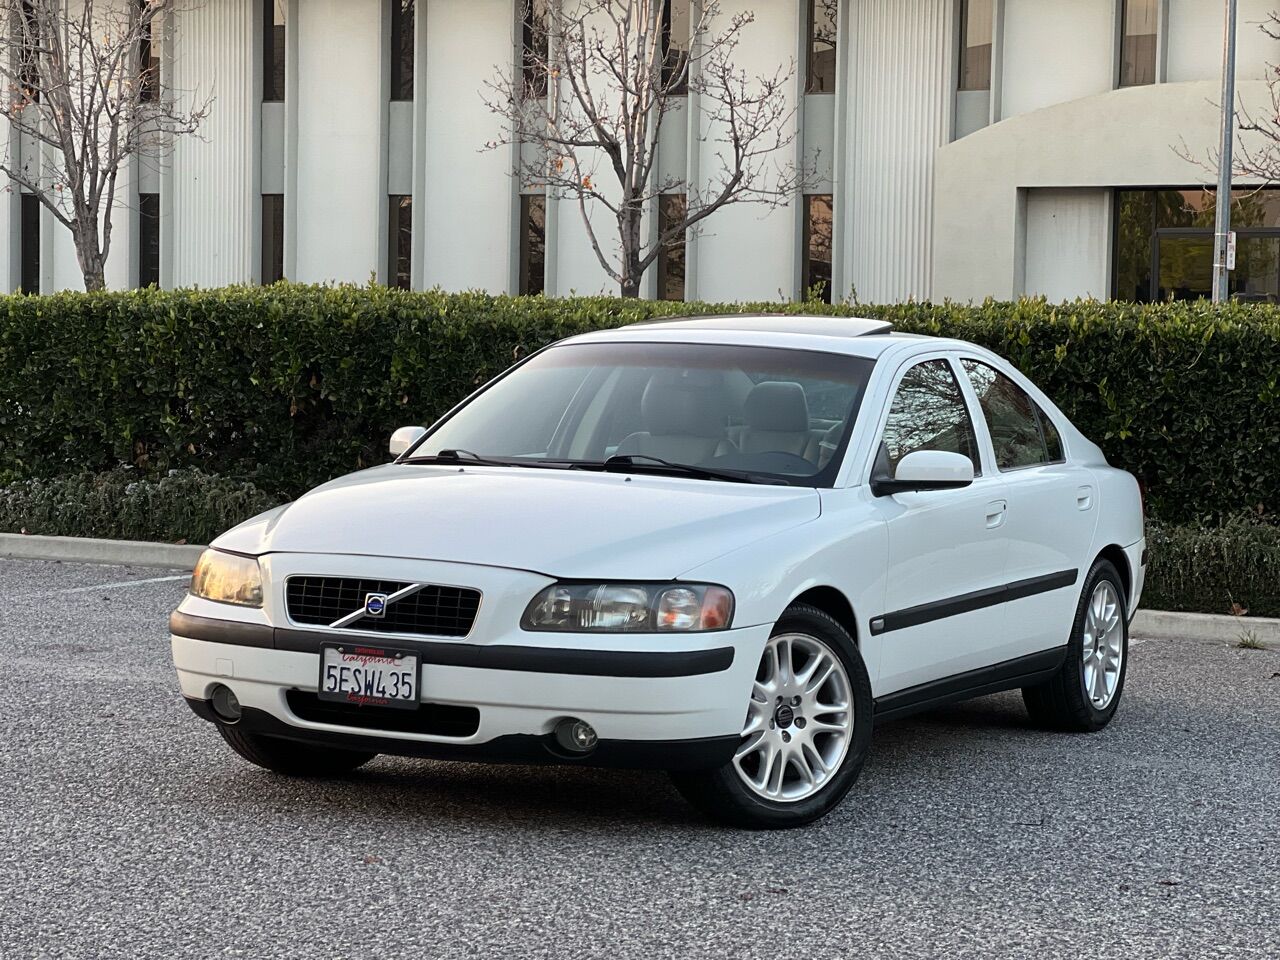 2004 Volvo S60 For Sale - Carsforsale.com®